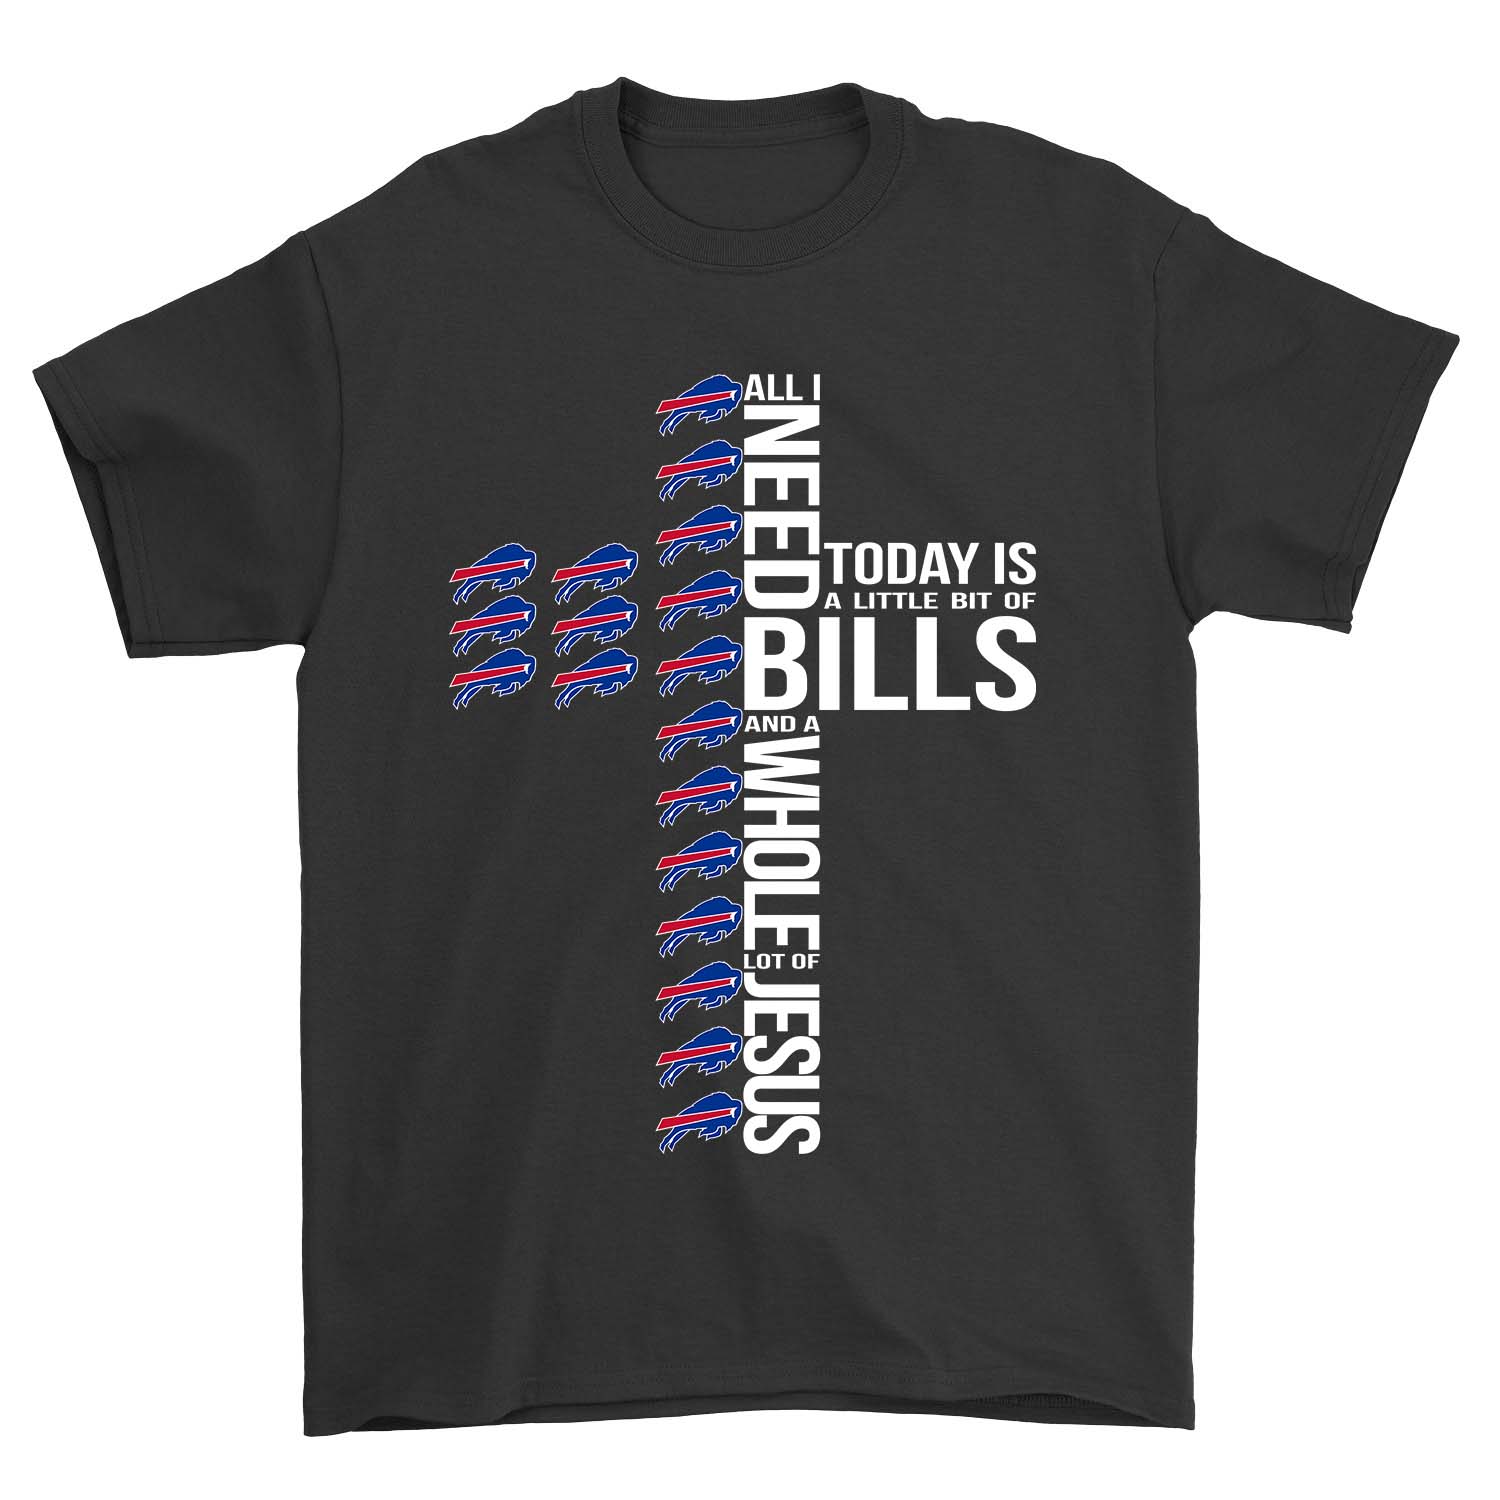 BUFFALO-BILLS-All-I-Need-Today-Is-A-Little-Bit-Of-A-Whole-Lot-Of-Jesus-T-SHIRT-2023